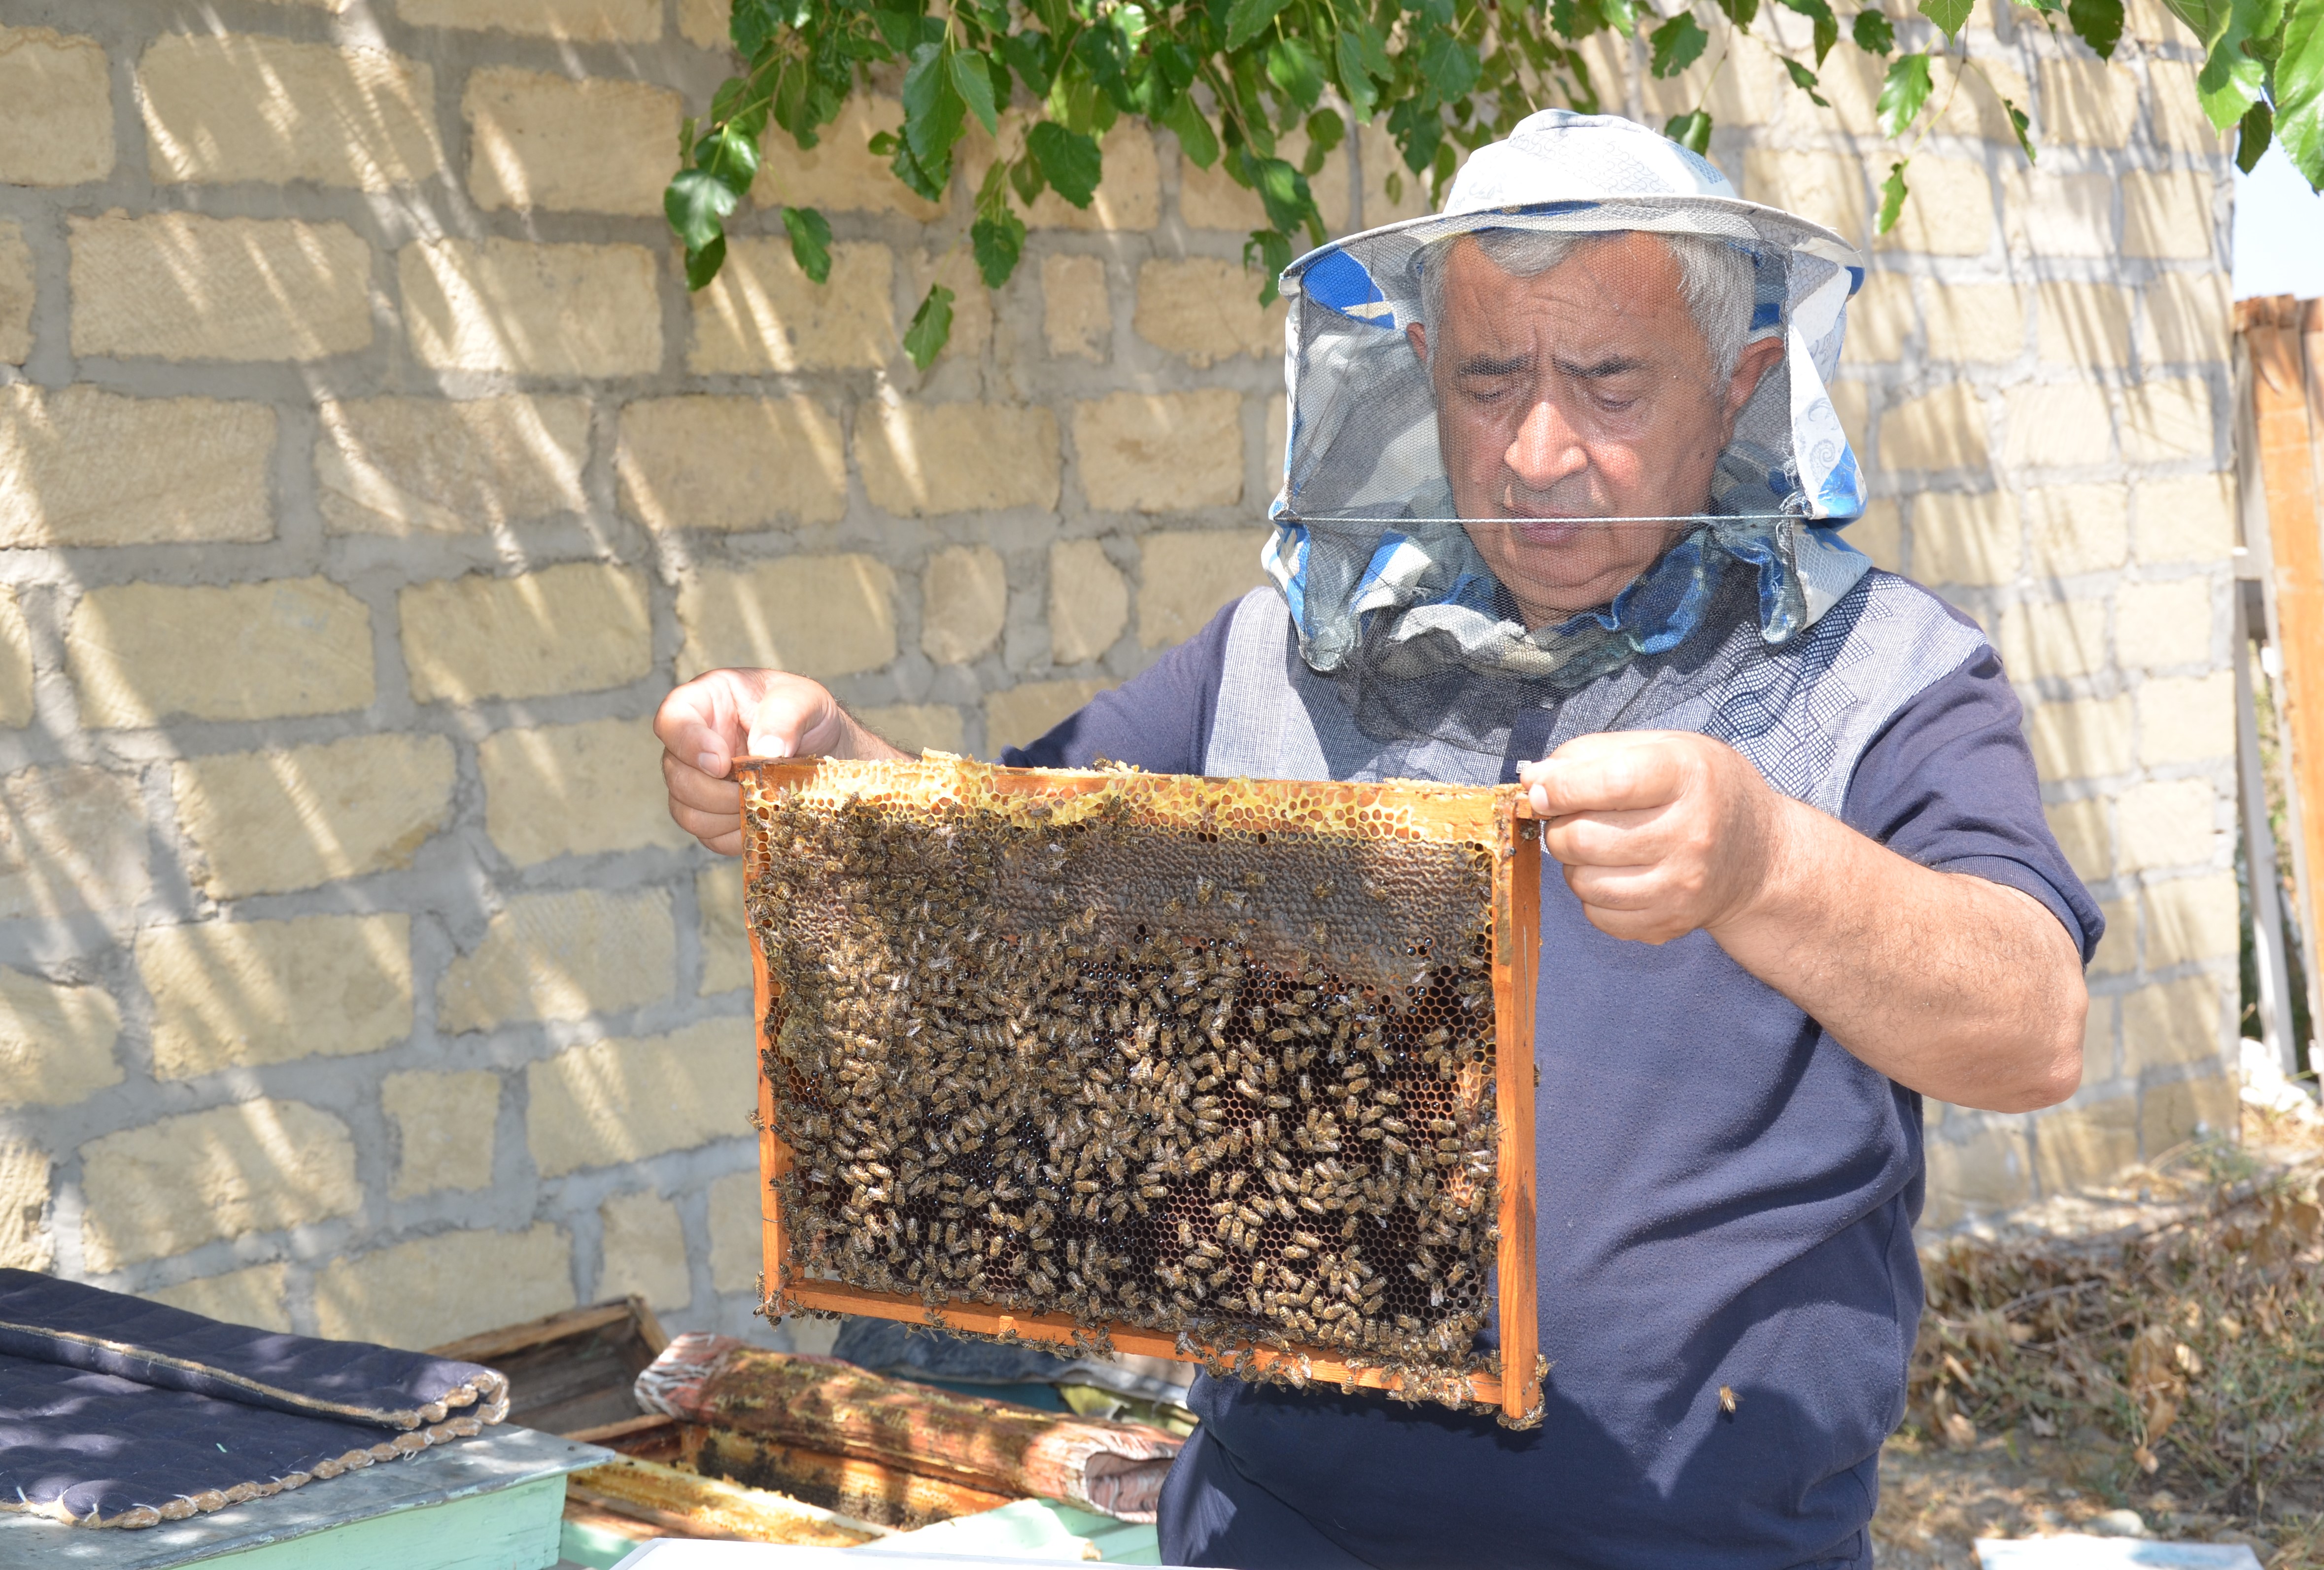 Device for increasing productivity of bee colonies successfully tested 